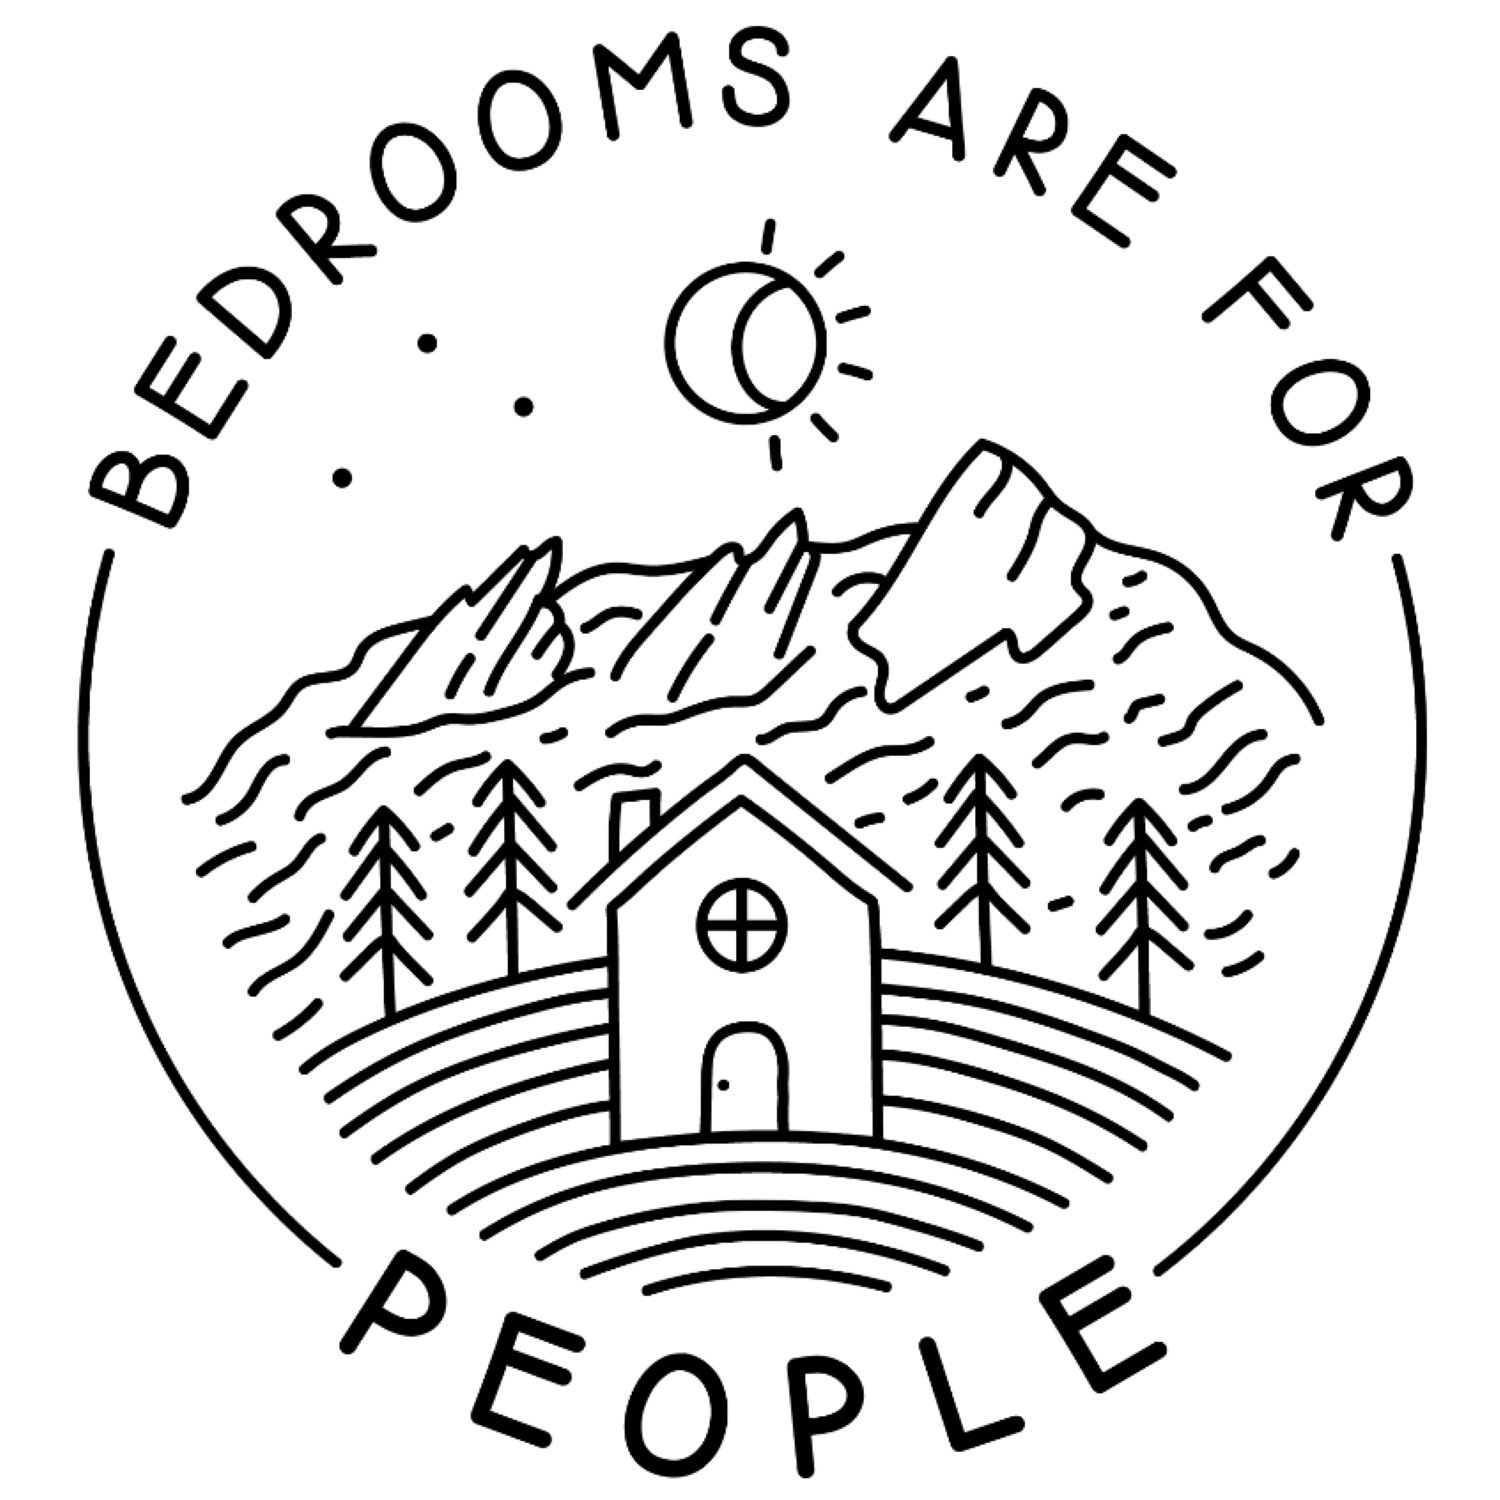 005 Bedrooms Are For People with Chelsea Castellano and Eric Budd